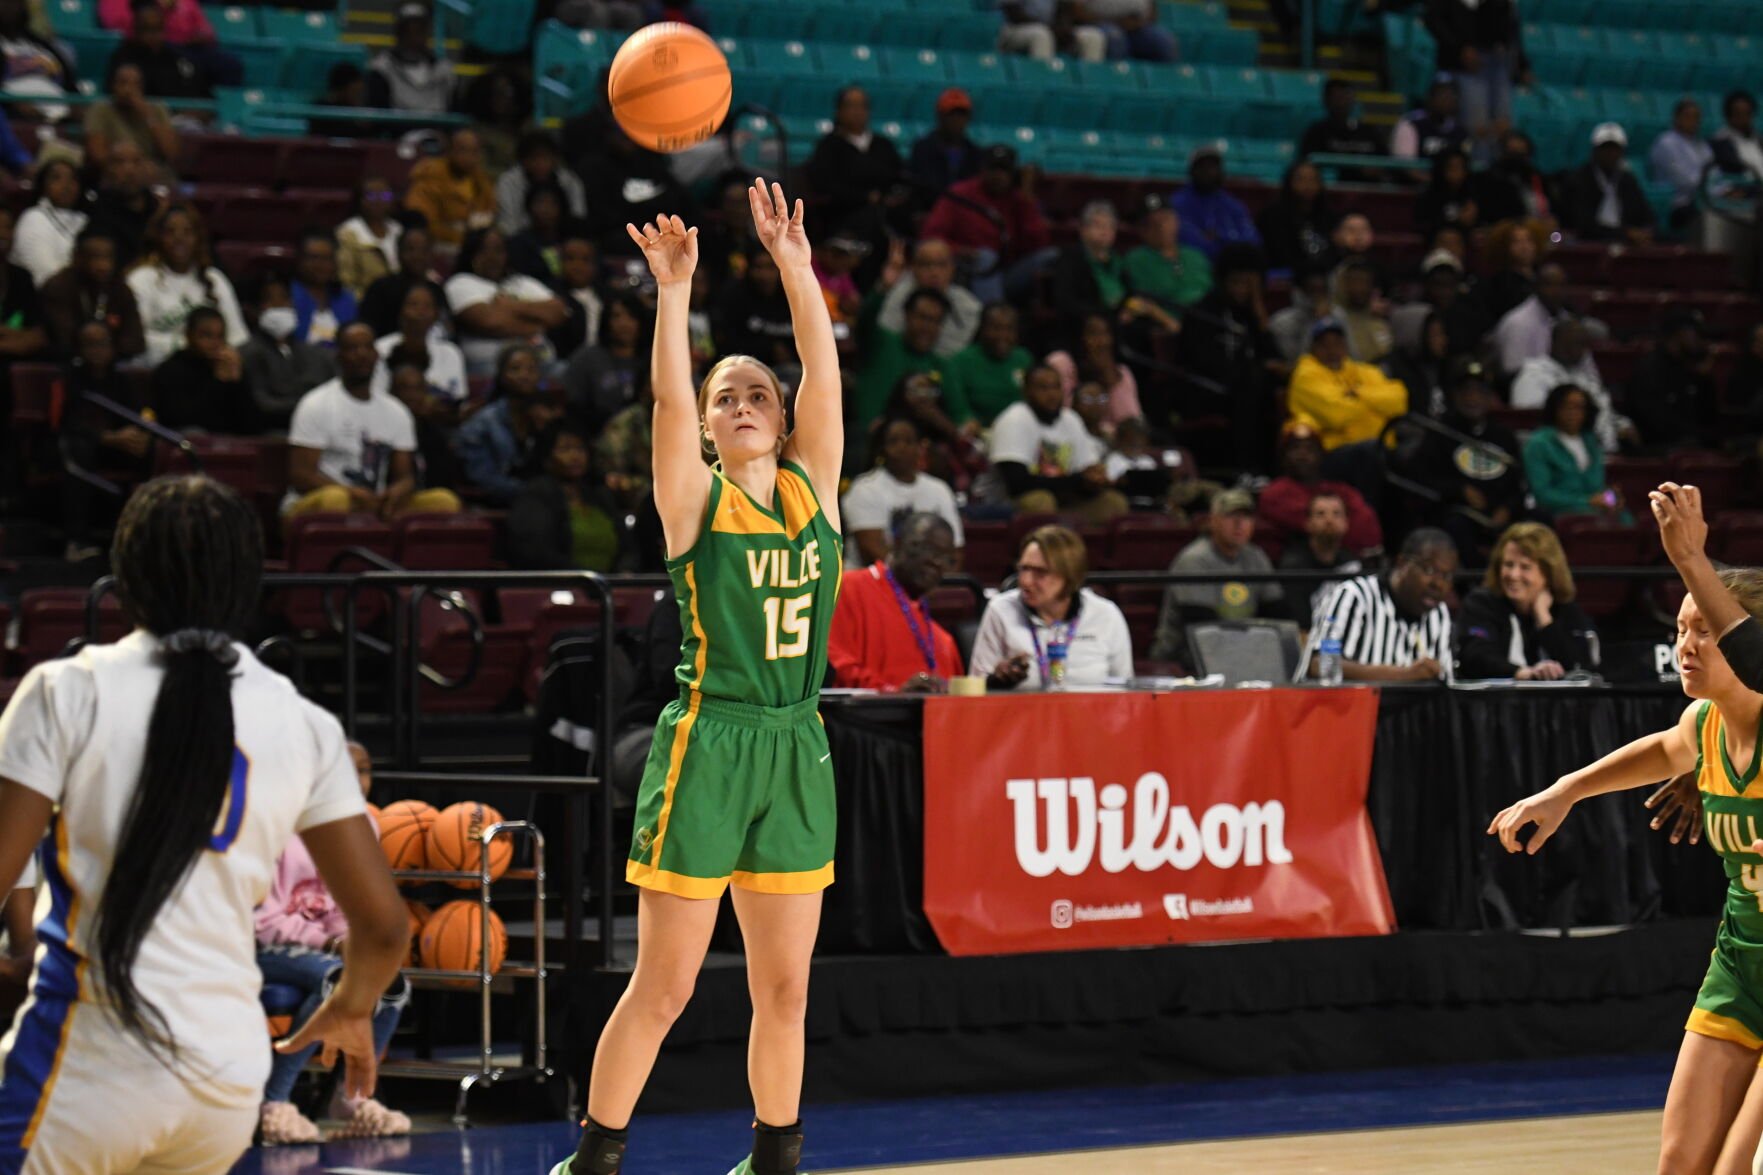 FEMALE BASKETBALL PLAYER OF THE YEAR: Daugherty led Green Wave into state finals